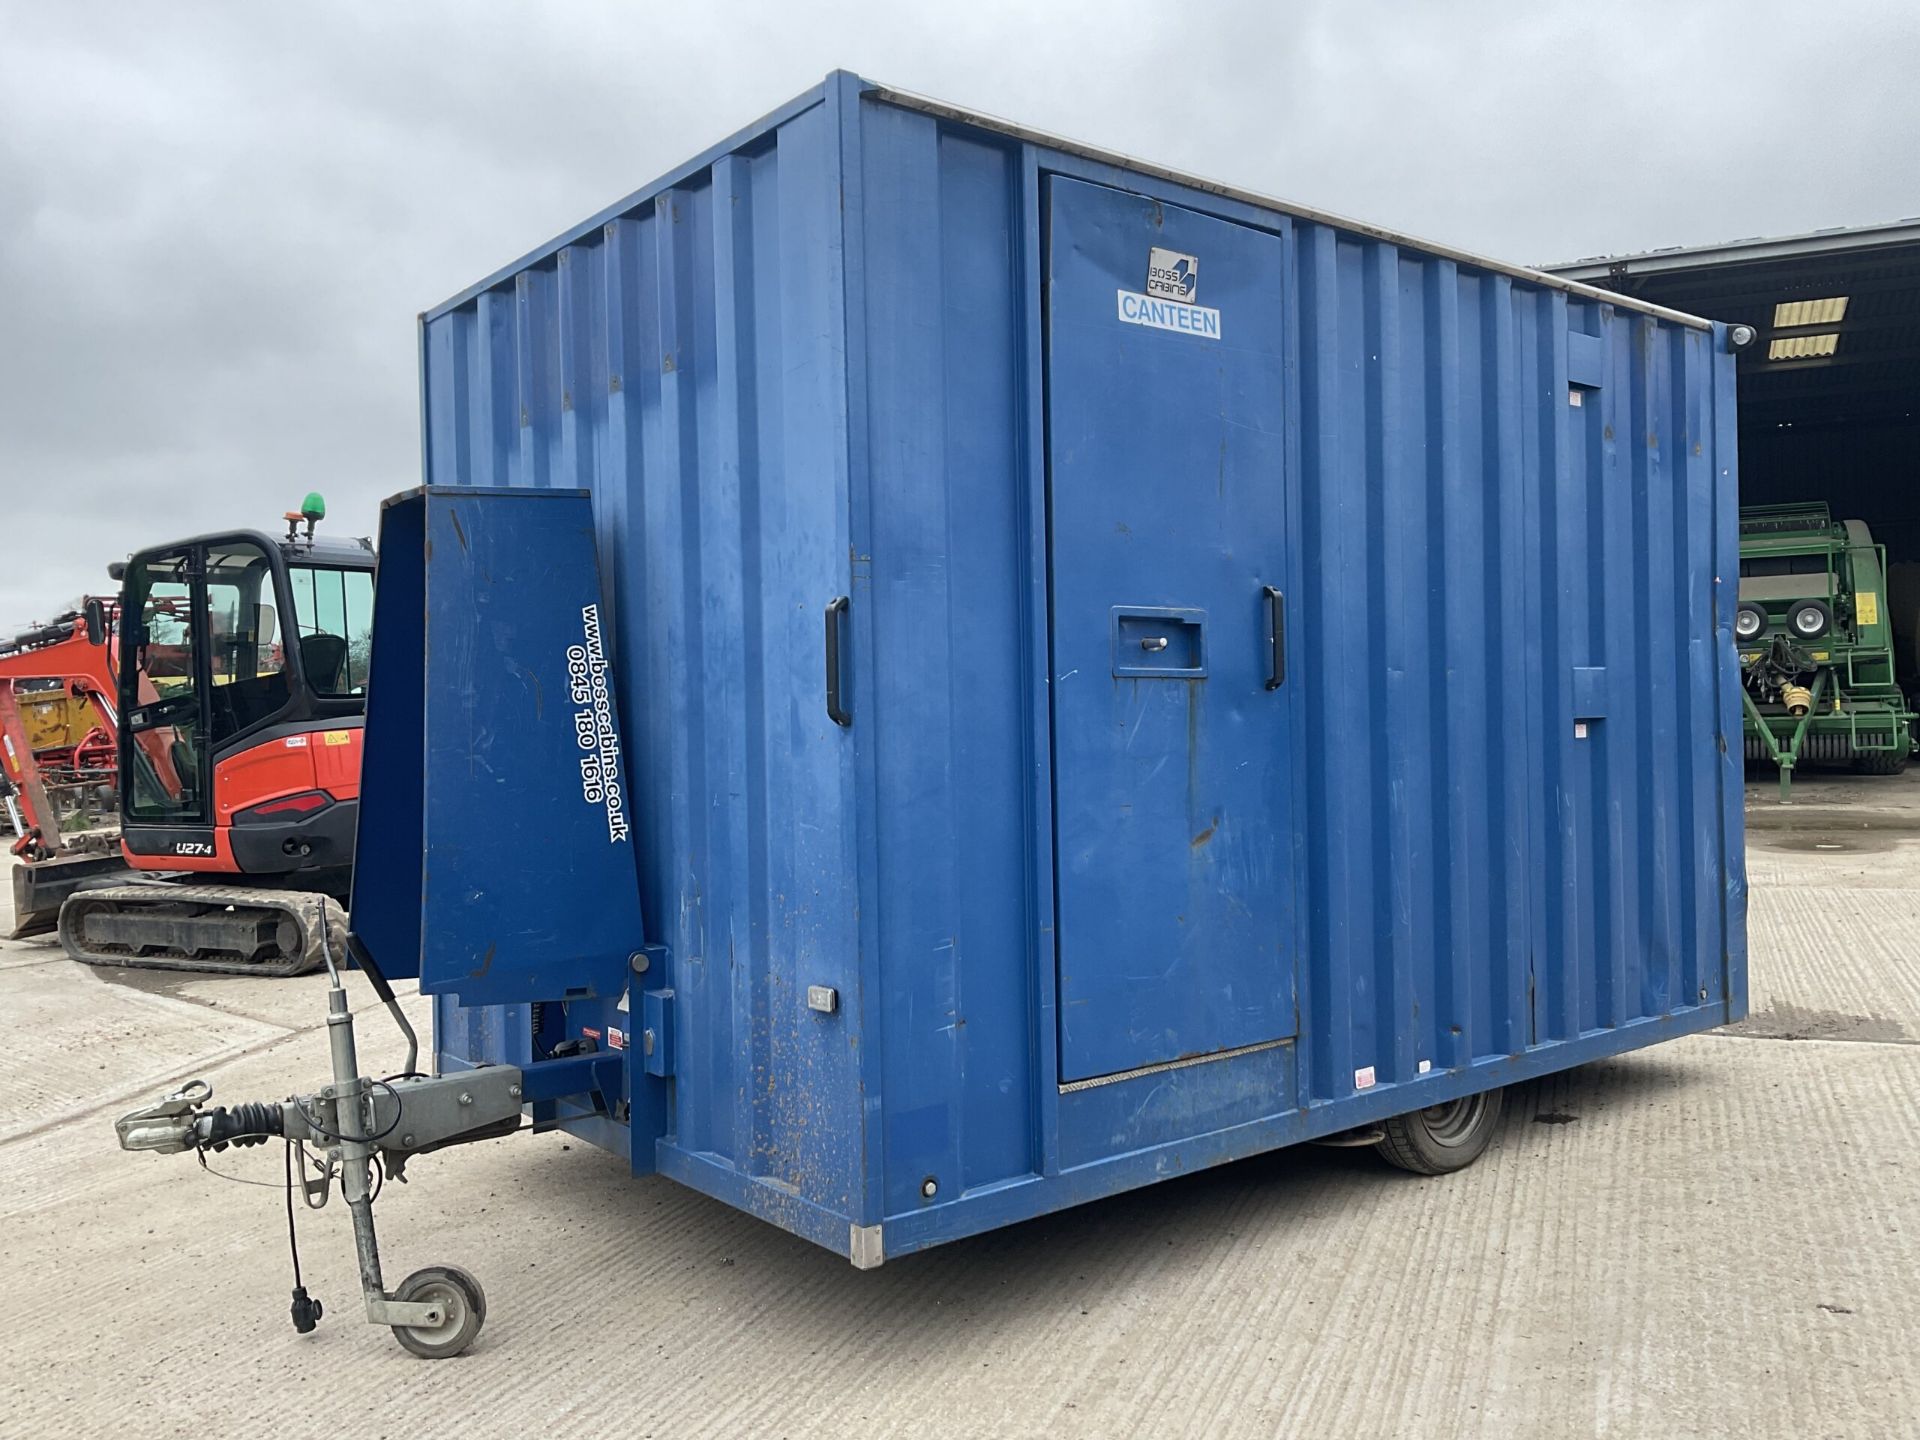 BOSS CABIN WELFARE UNIT WITH W/C, KITCHEN/DINING AREA, AND RED BOX POWER GENERATOR